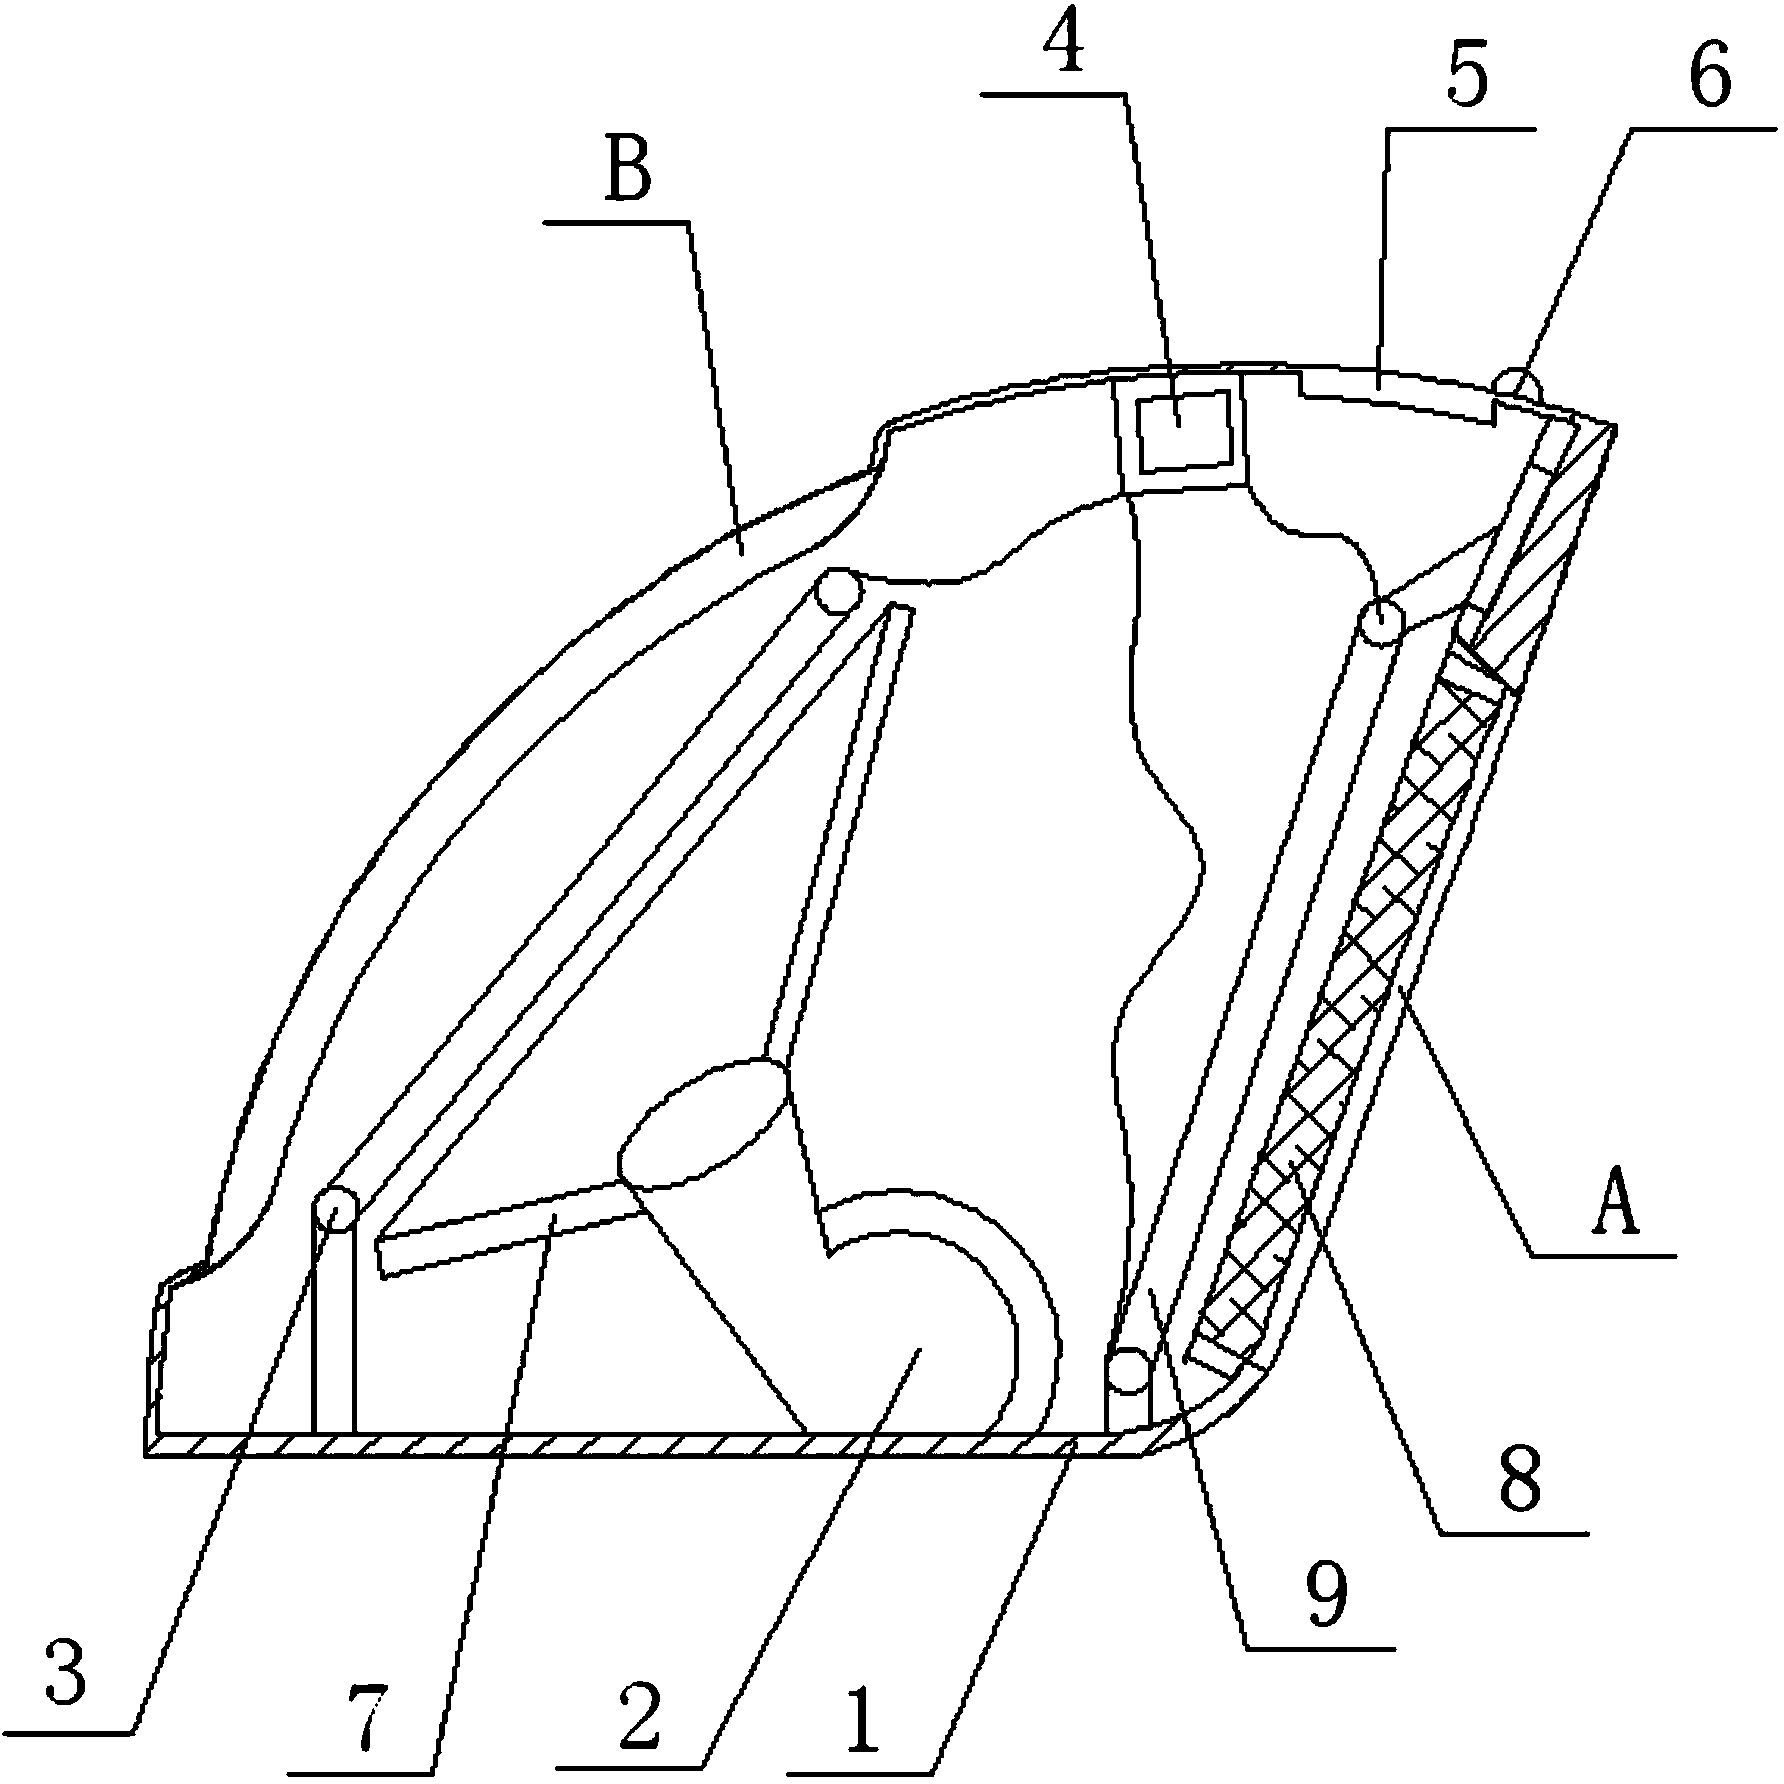 Portable air partitioning and generating device for doctor-patient separation